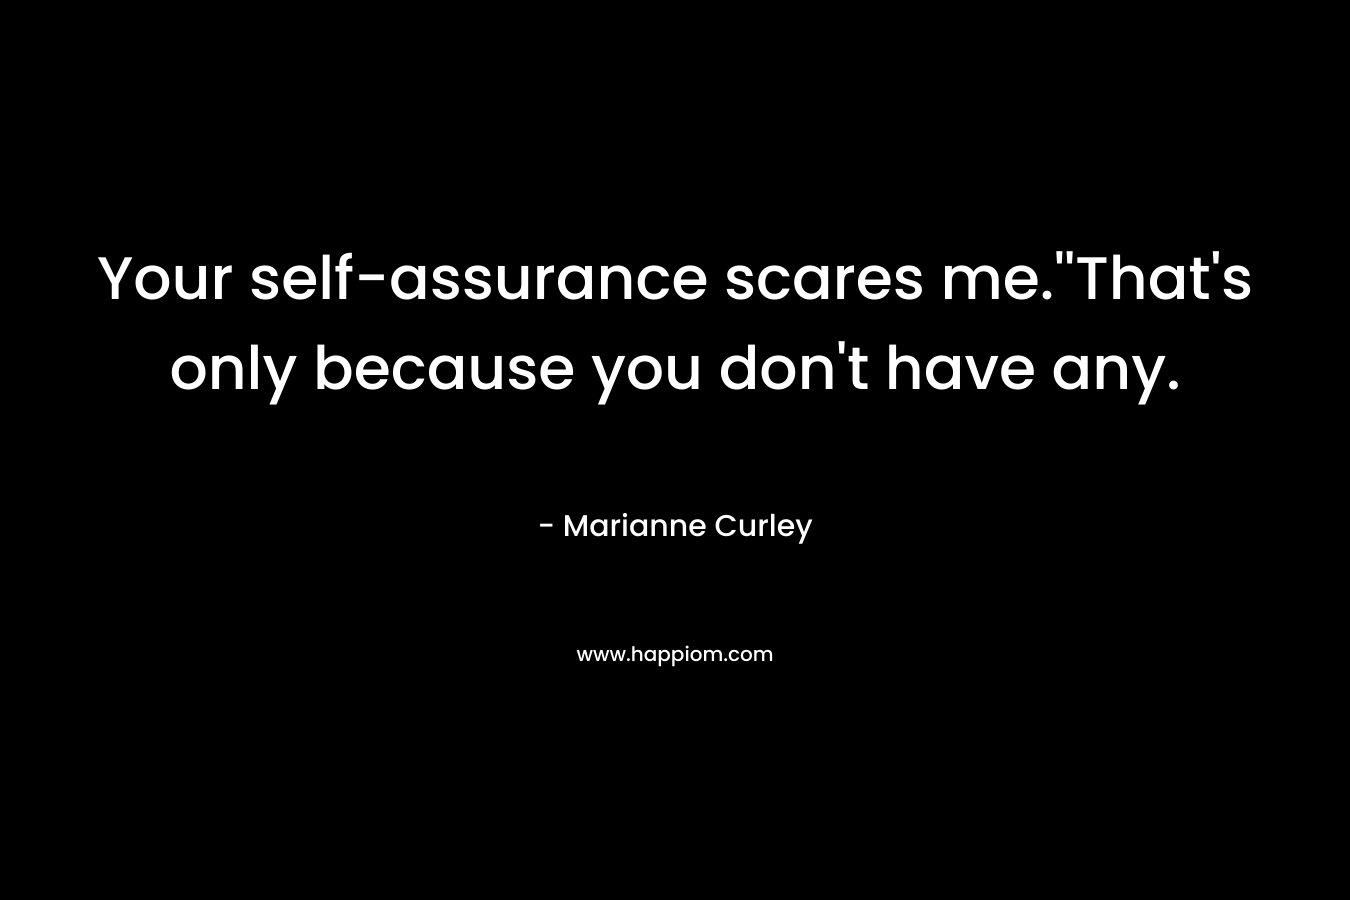 Your self-assurance scares me.”That’s only because you don’t have any. – Marianne Curley